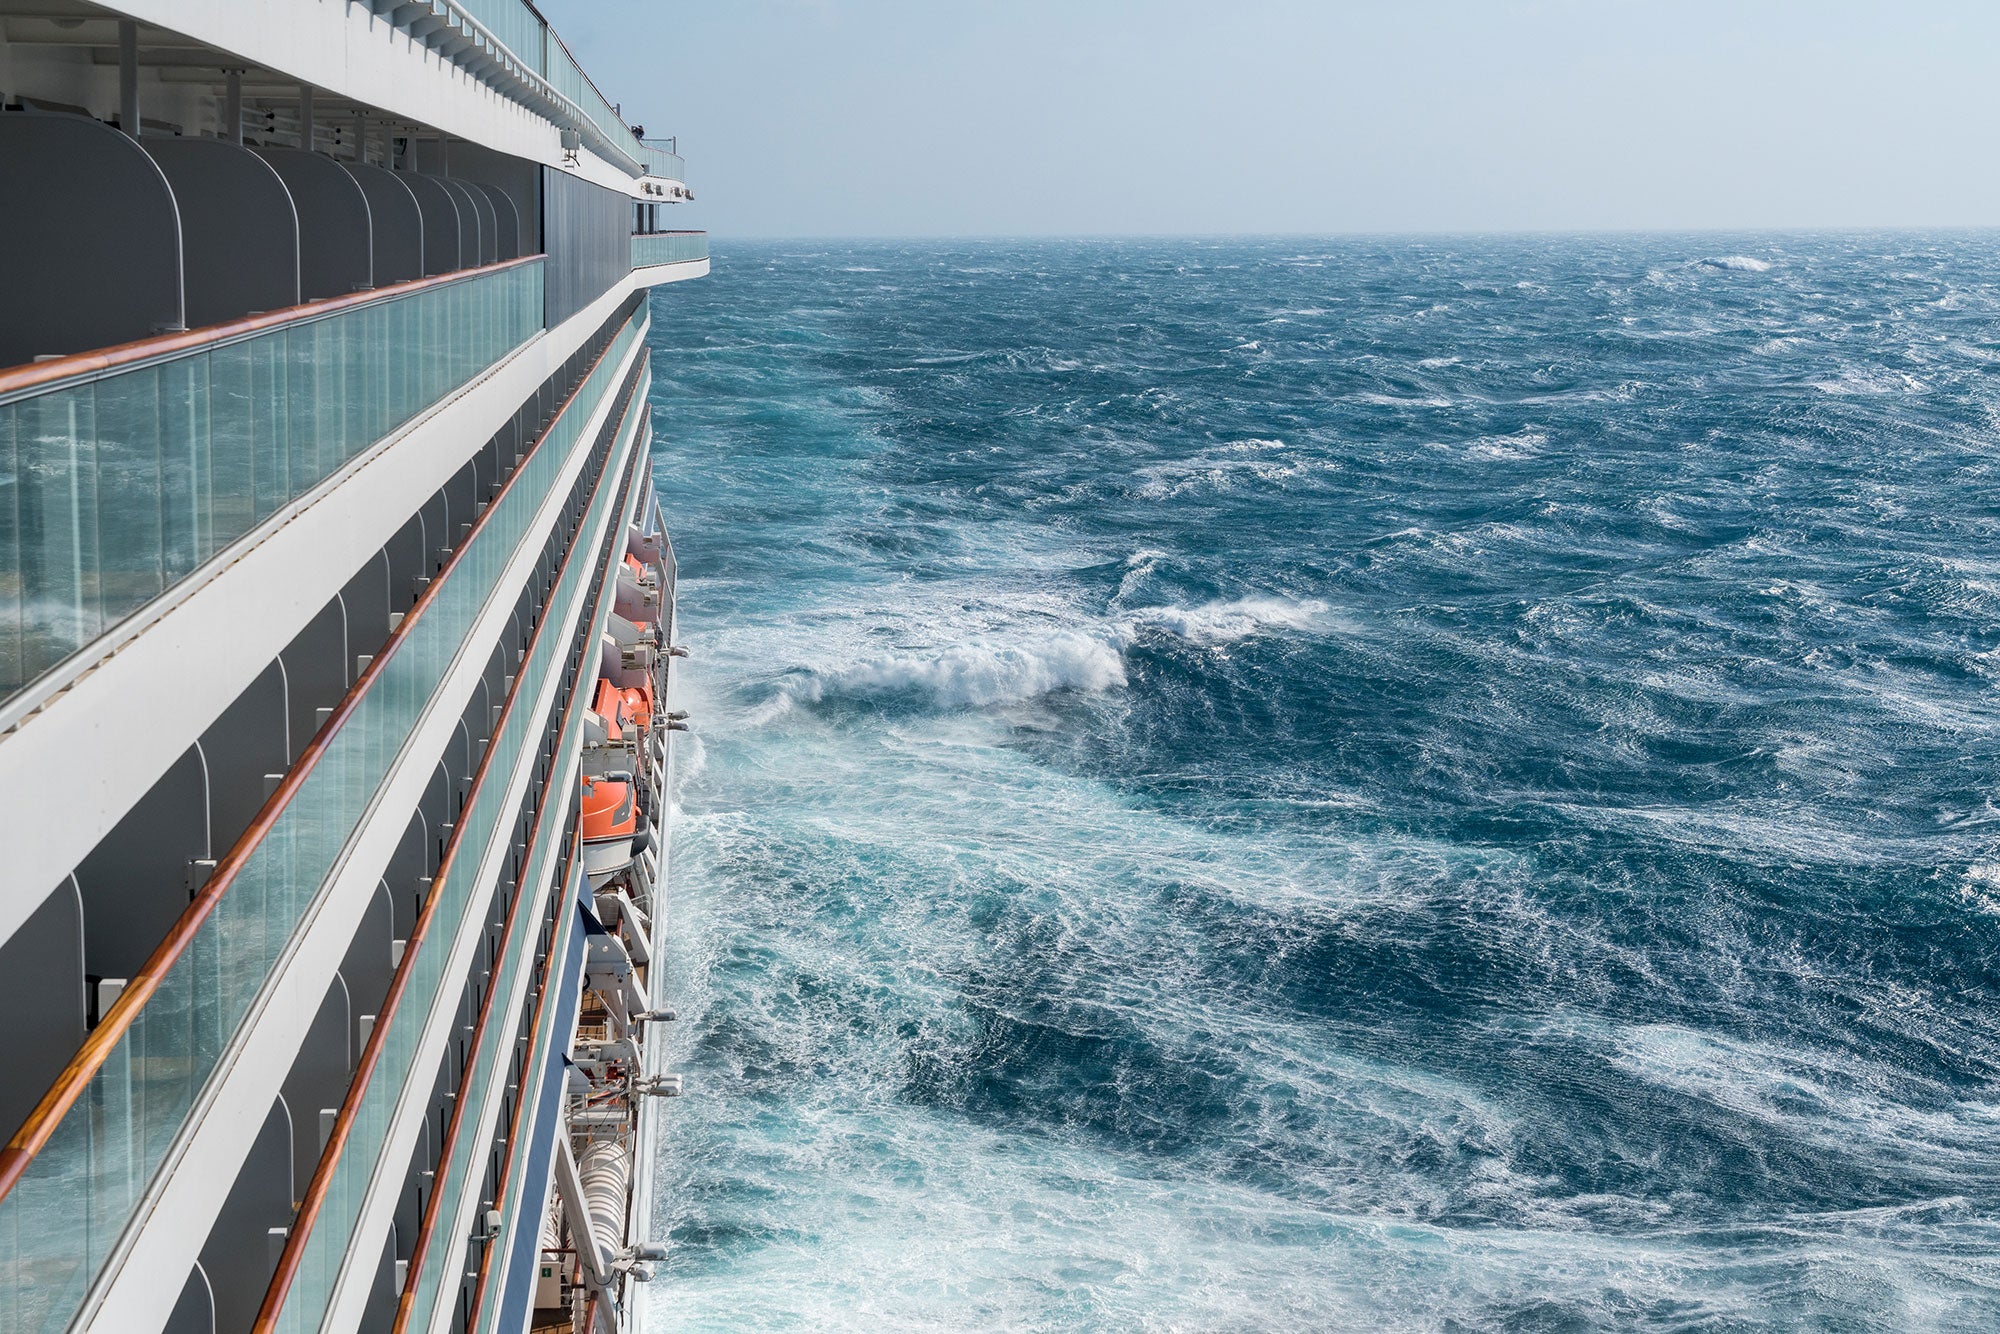 Here's what it's like on a cruise ship stuck at sea during a hurricane